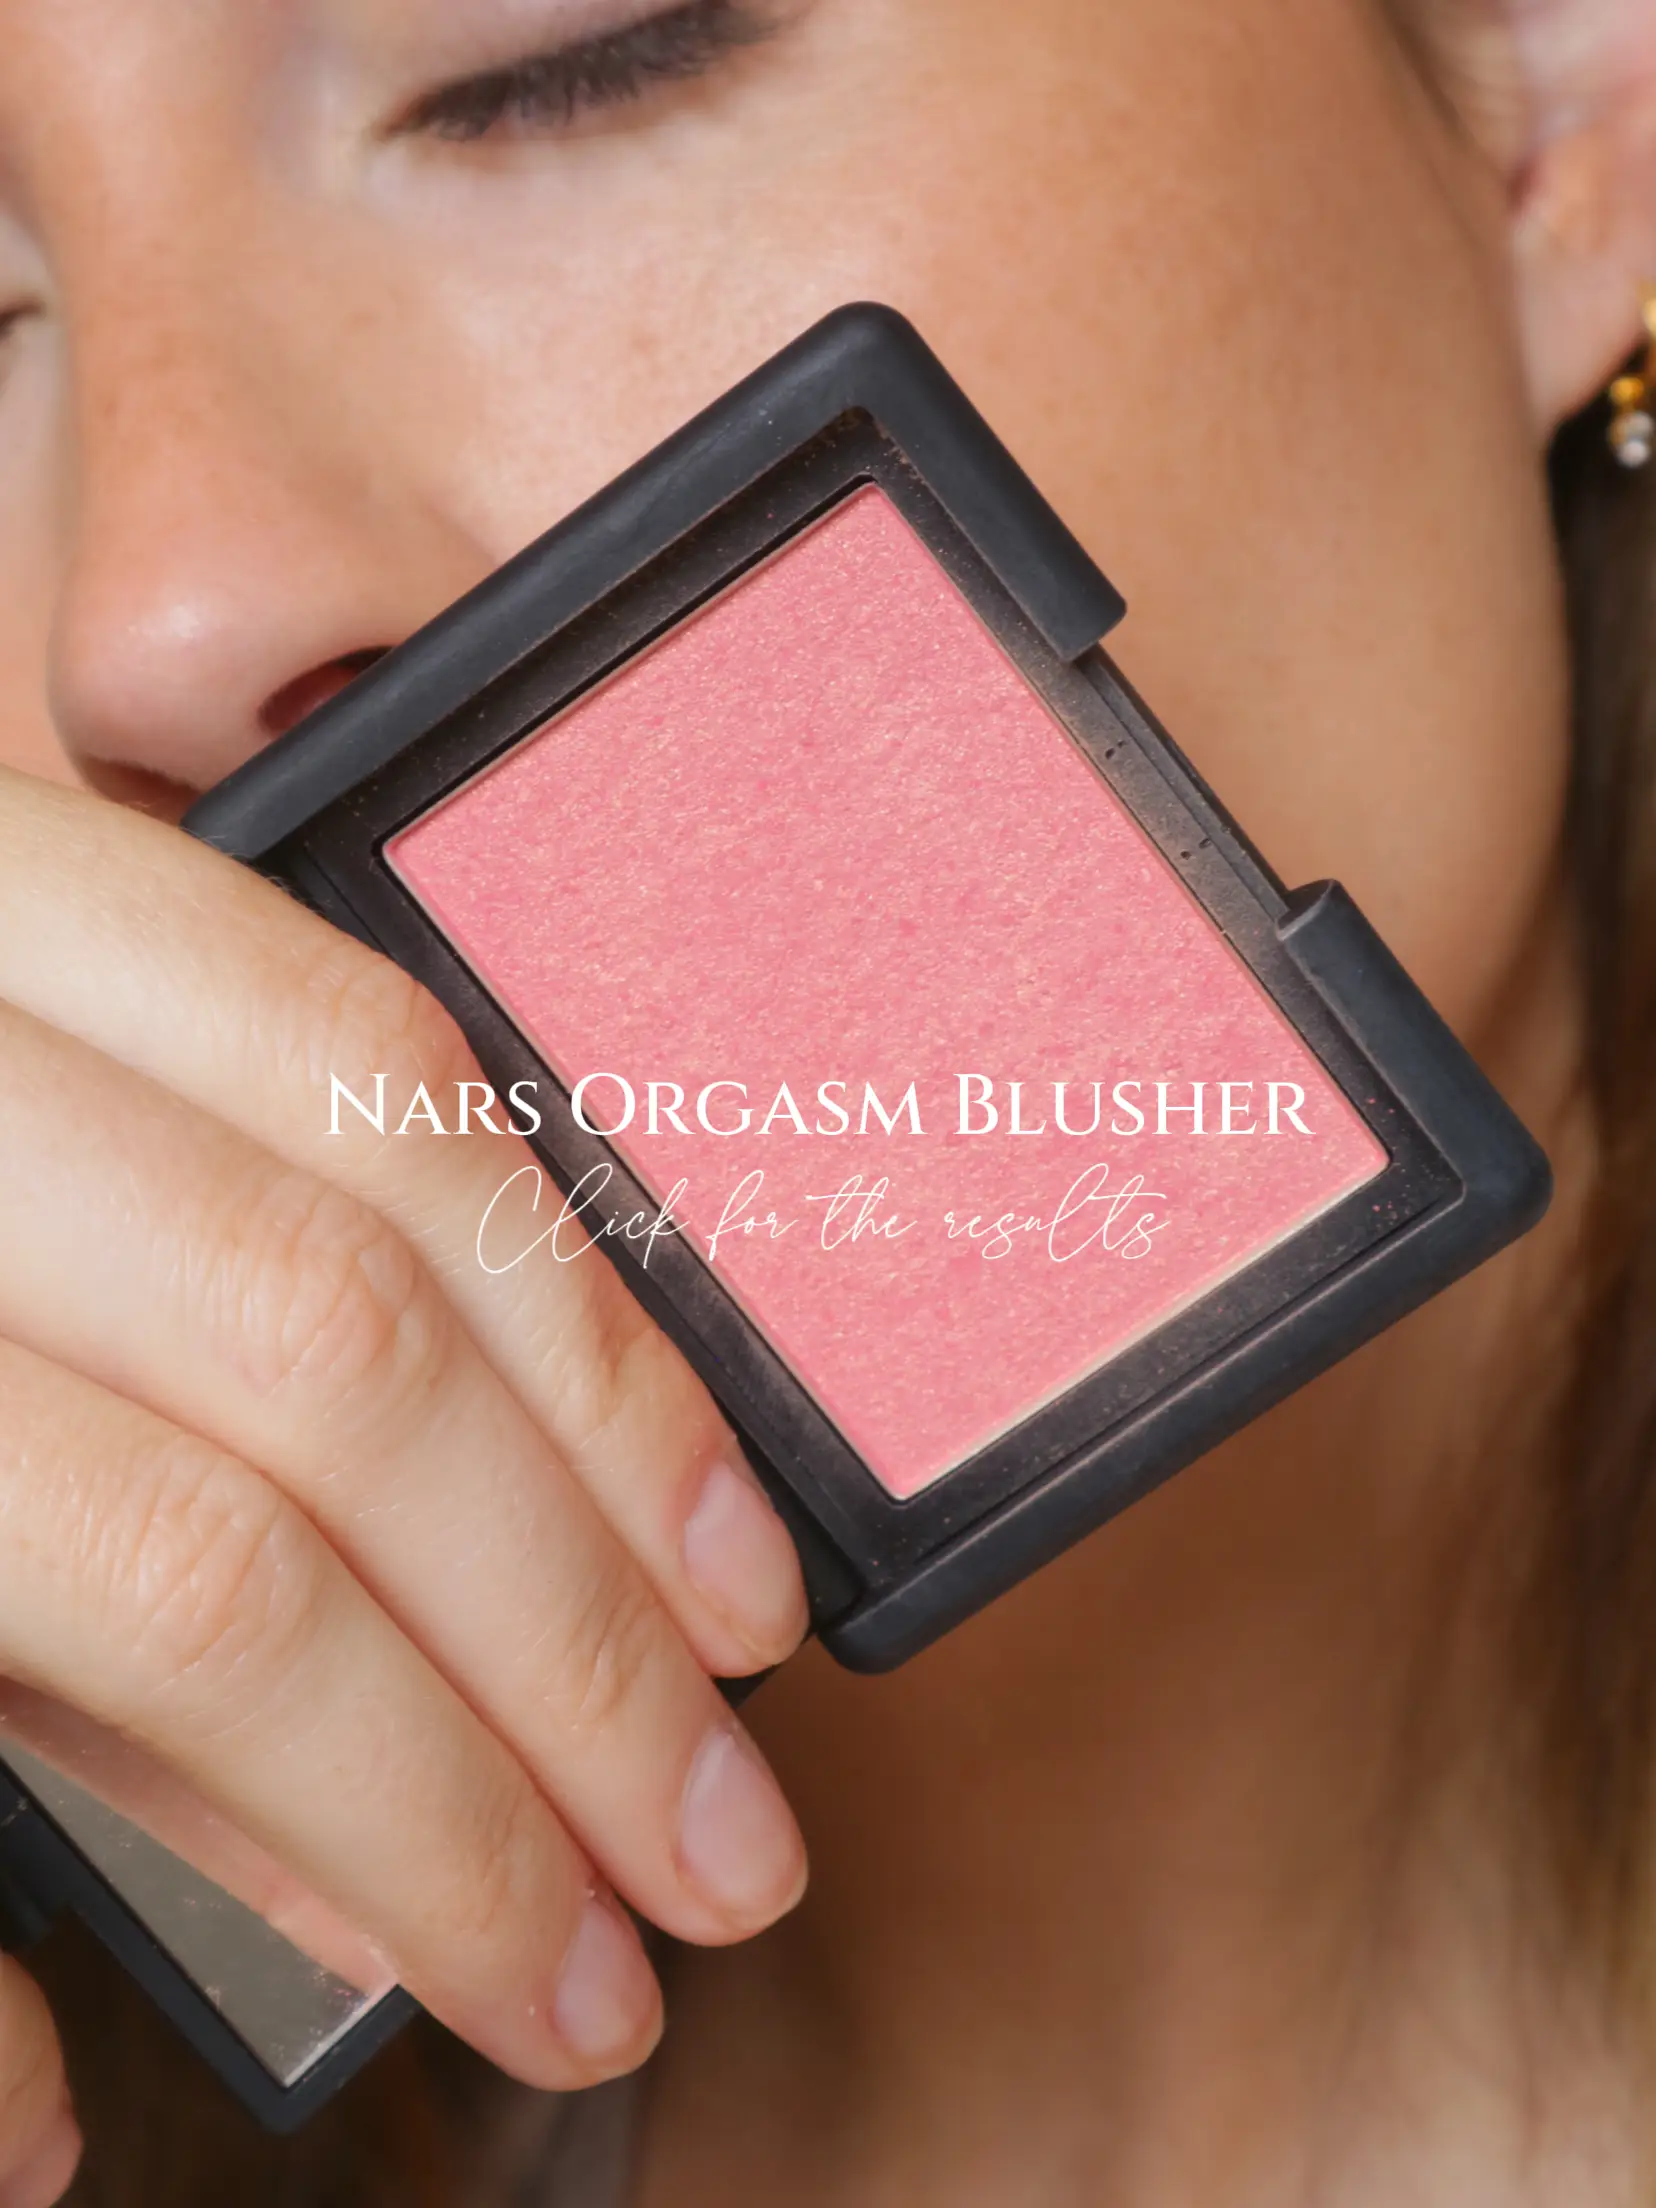 London Beauty Review: Swatches: NARS Powder Blush in Sin